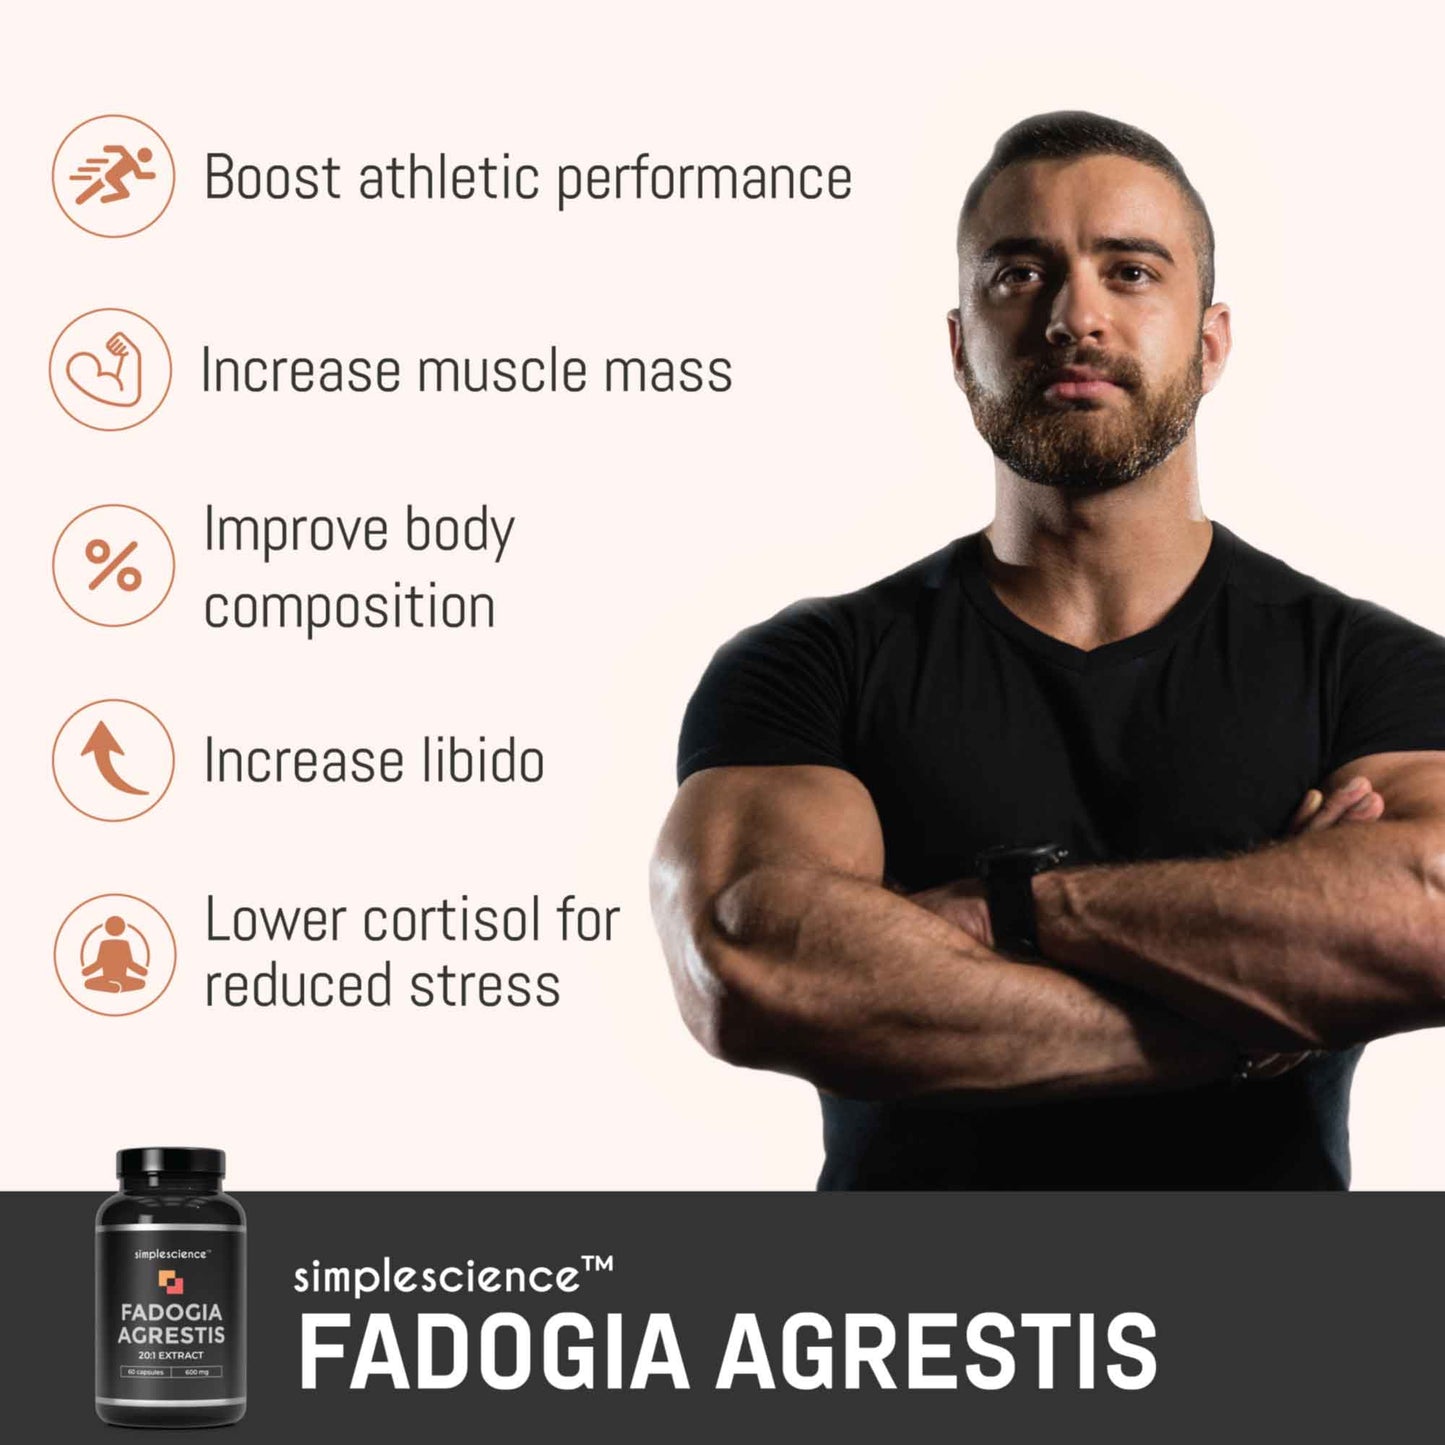 Fadogia agrestis 600mg simplescience muscle mass body composition supplements 20:1 extract supplement 60 capsules benefits best supplement guide. Highest concentration. Andrew Huberman dosage. Front of bottle